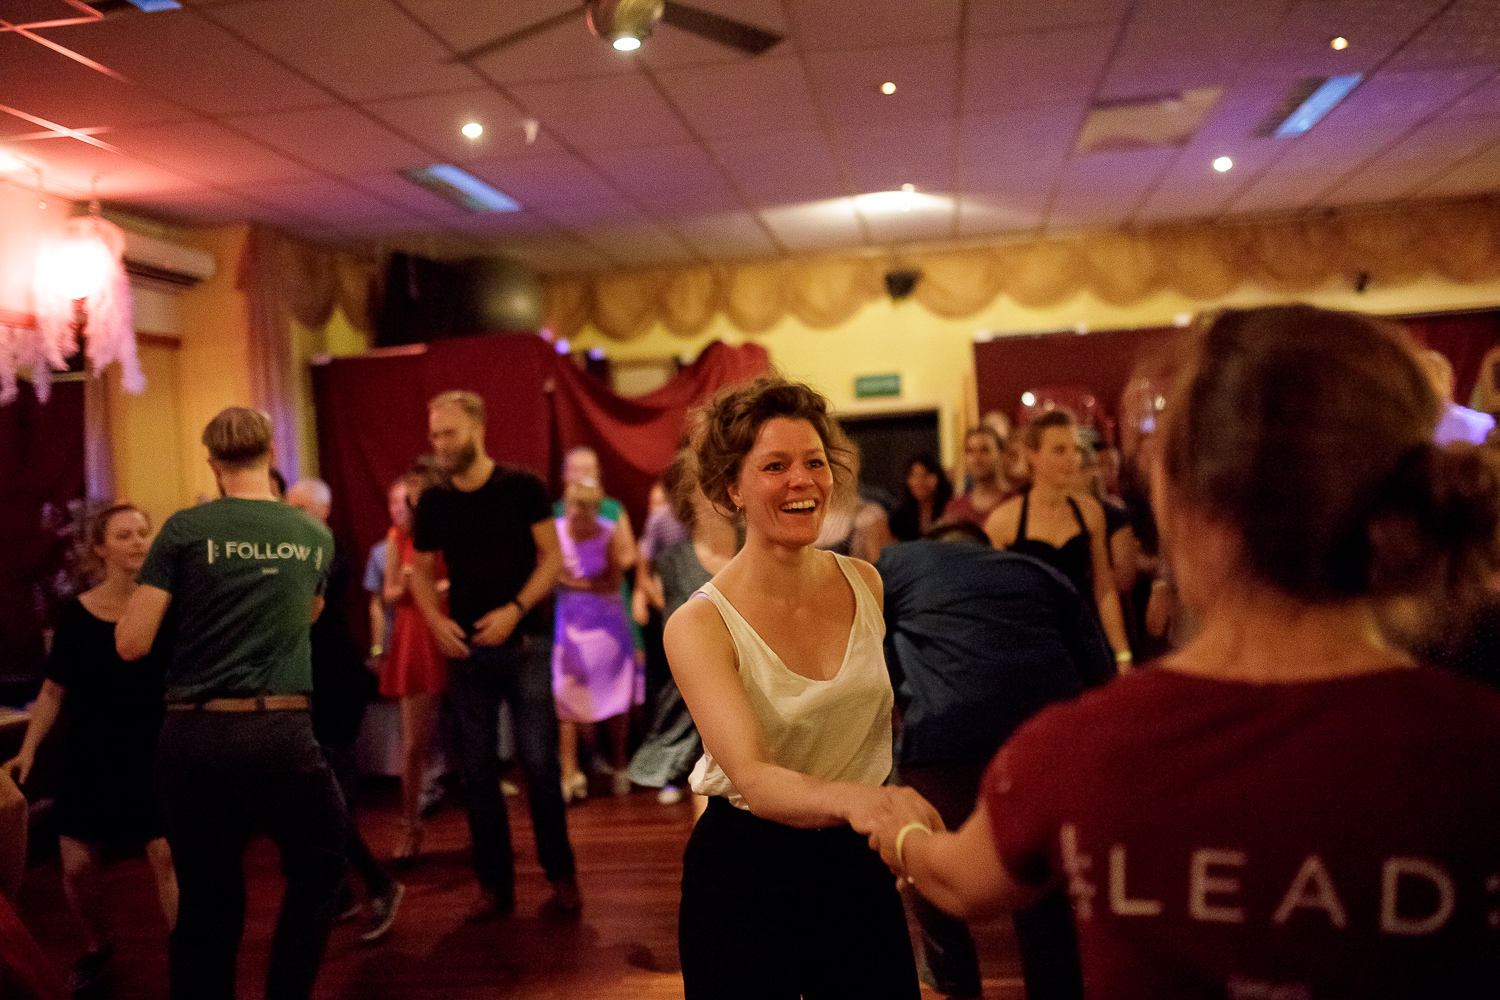  Ceuvel Swing Camp 2017 - Photo Credit: For Dancers Only (http://d.pr/1fEEY) - http://www.ebobrie.com/ceuvel-swing-camp-2017 